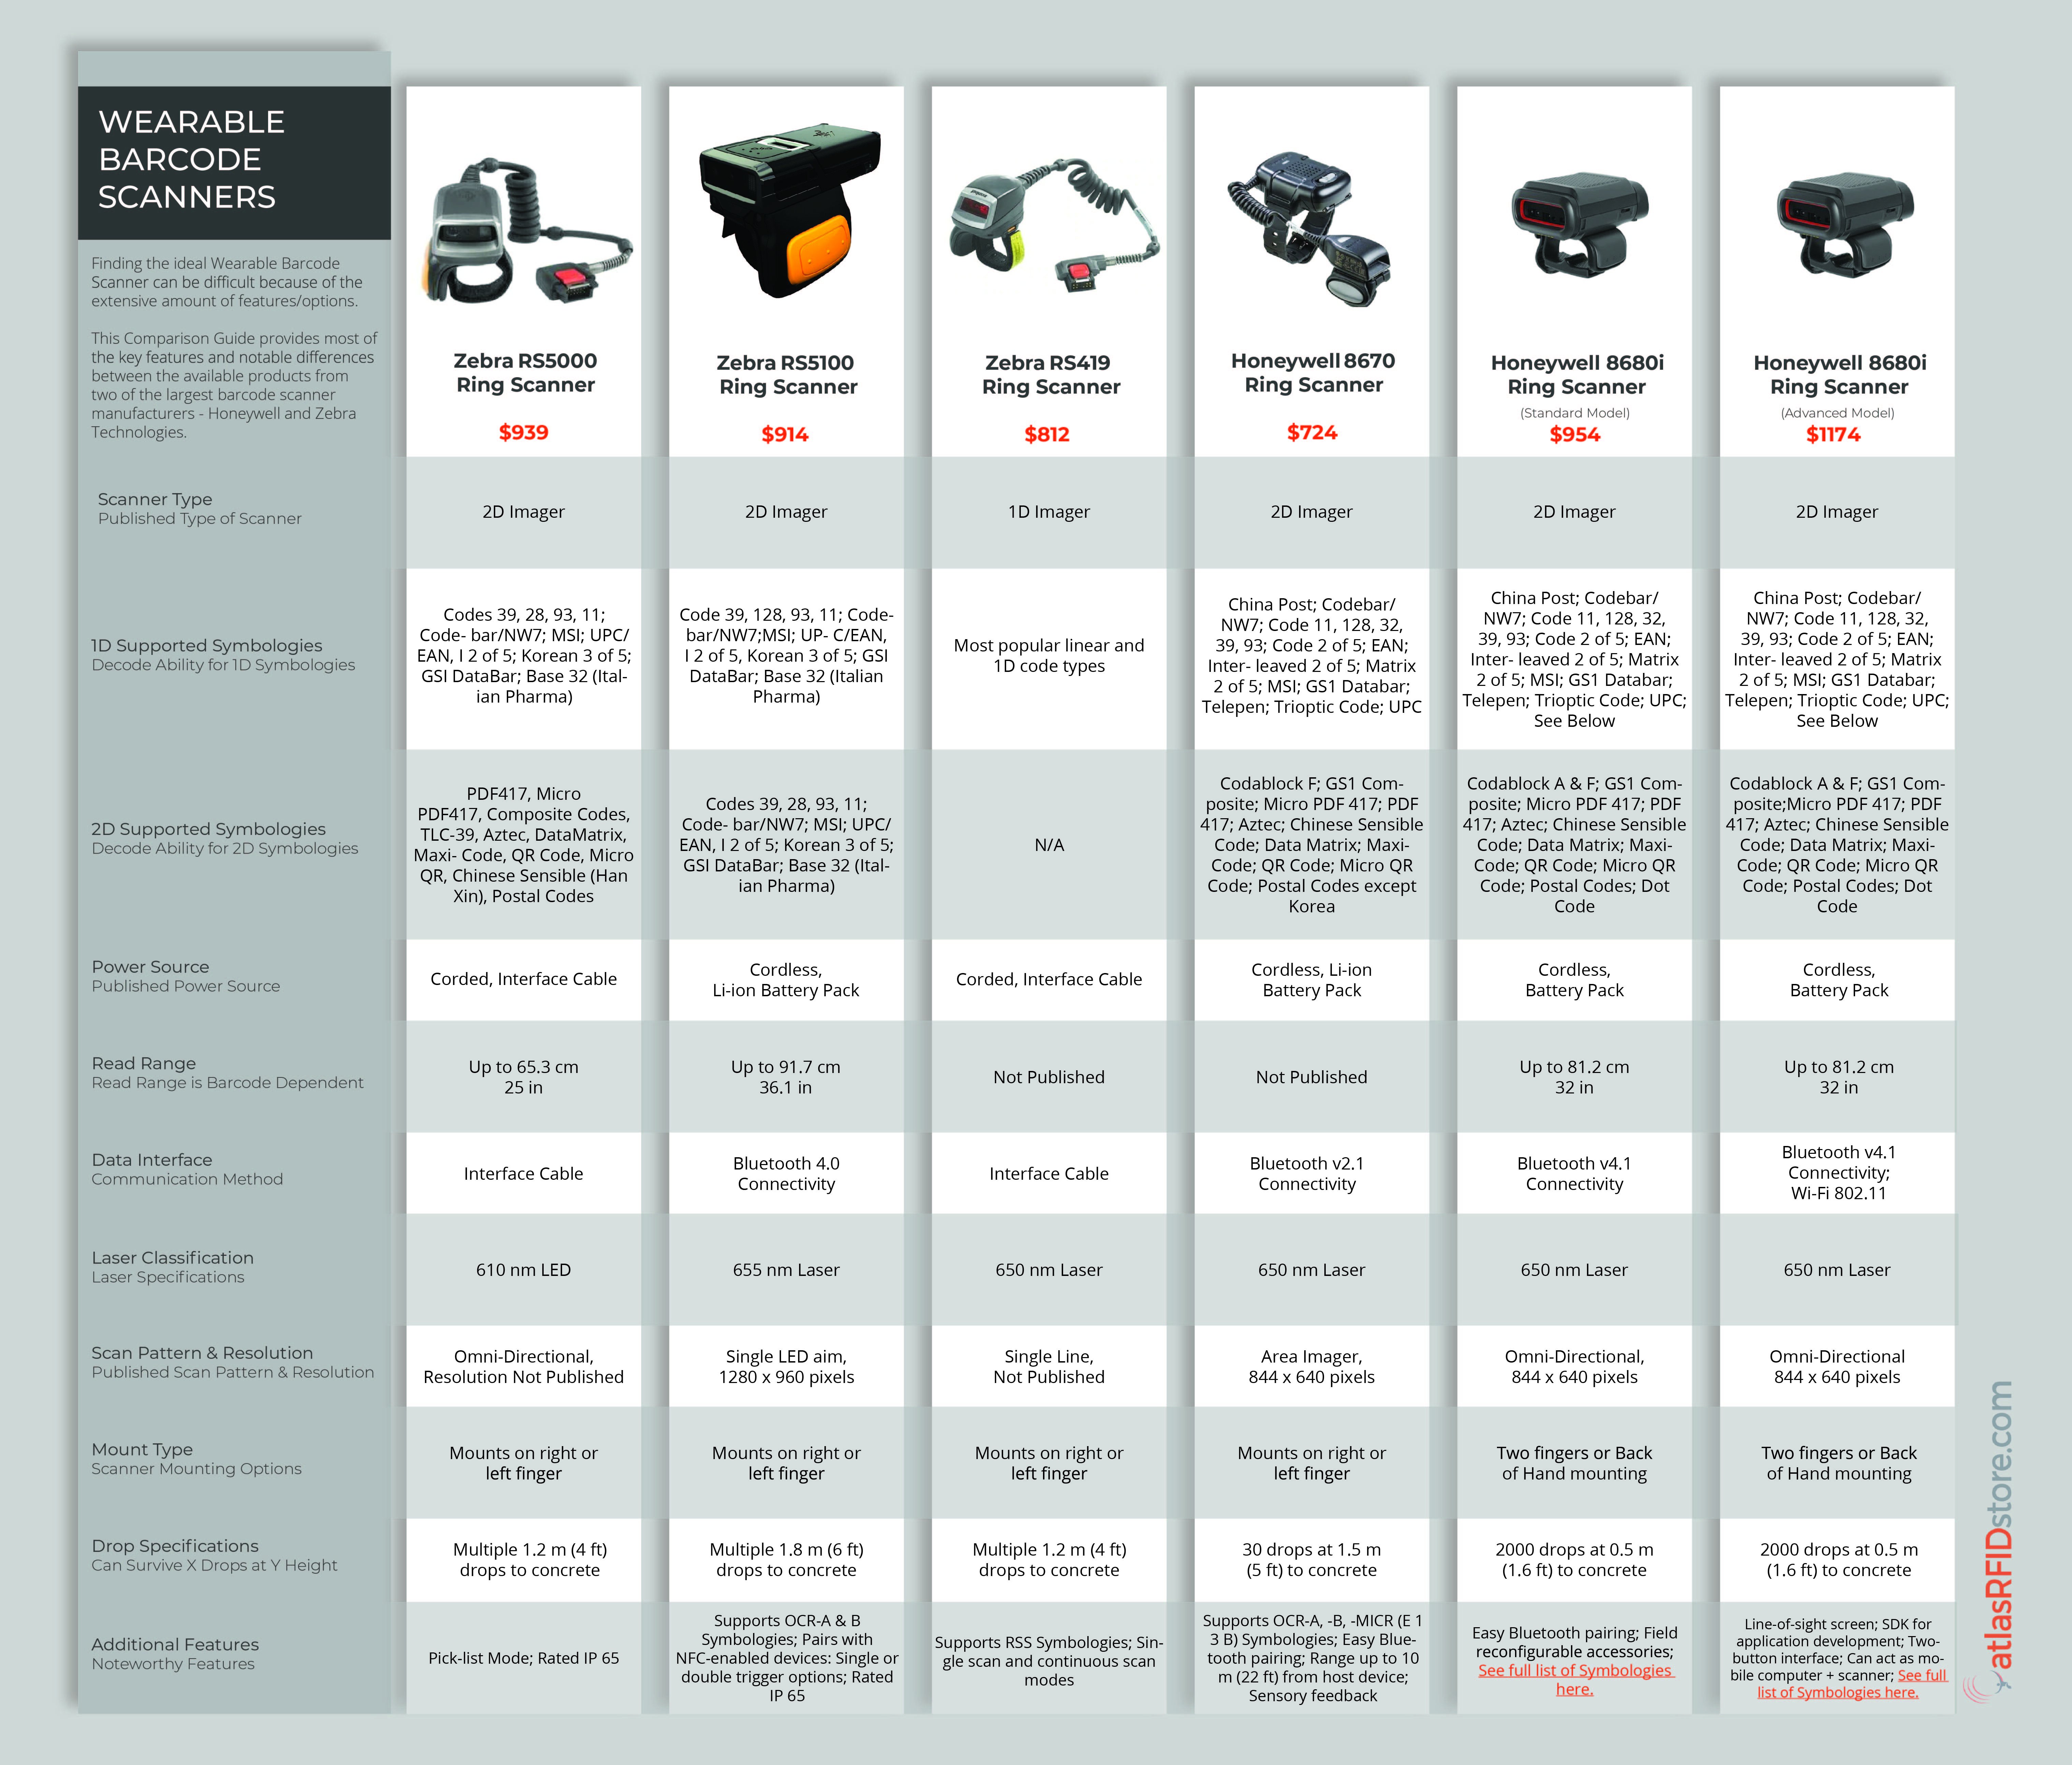 Wearable Barcode Scanner Comparison Guide